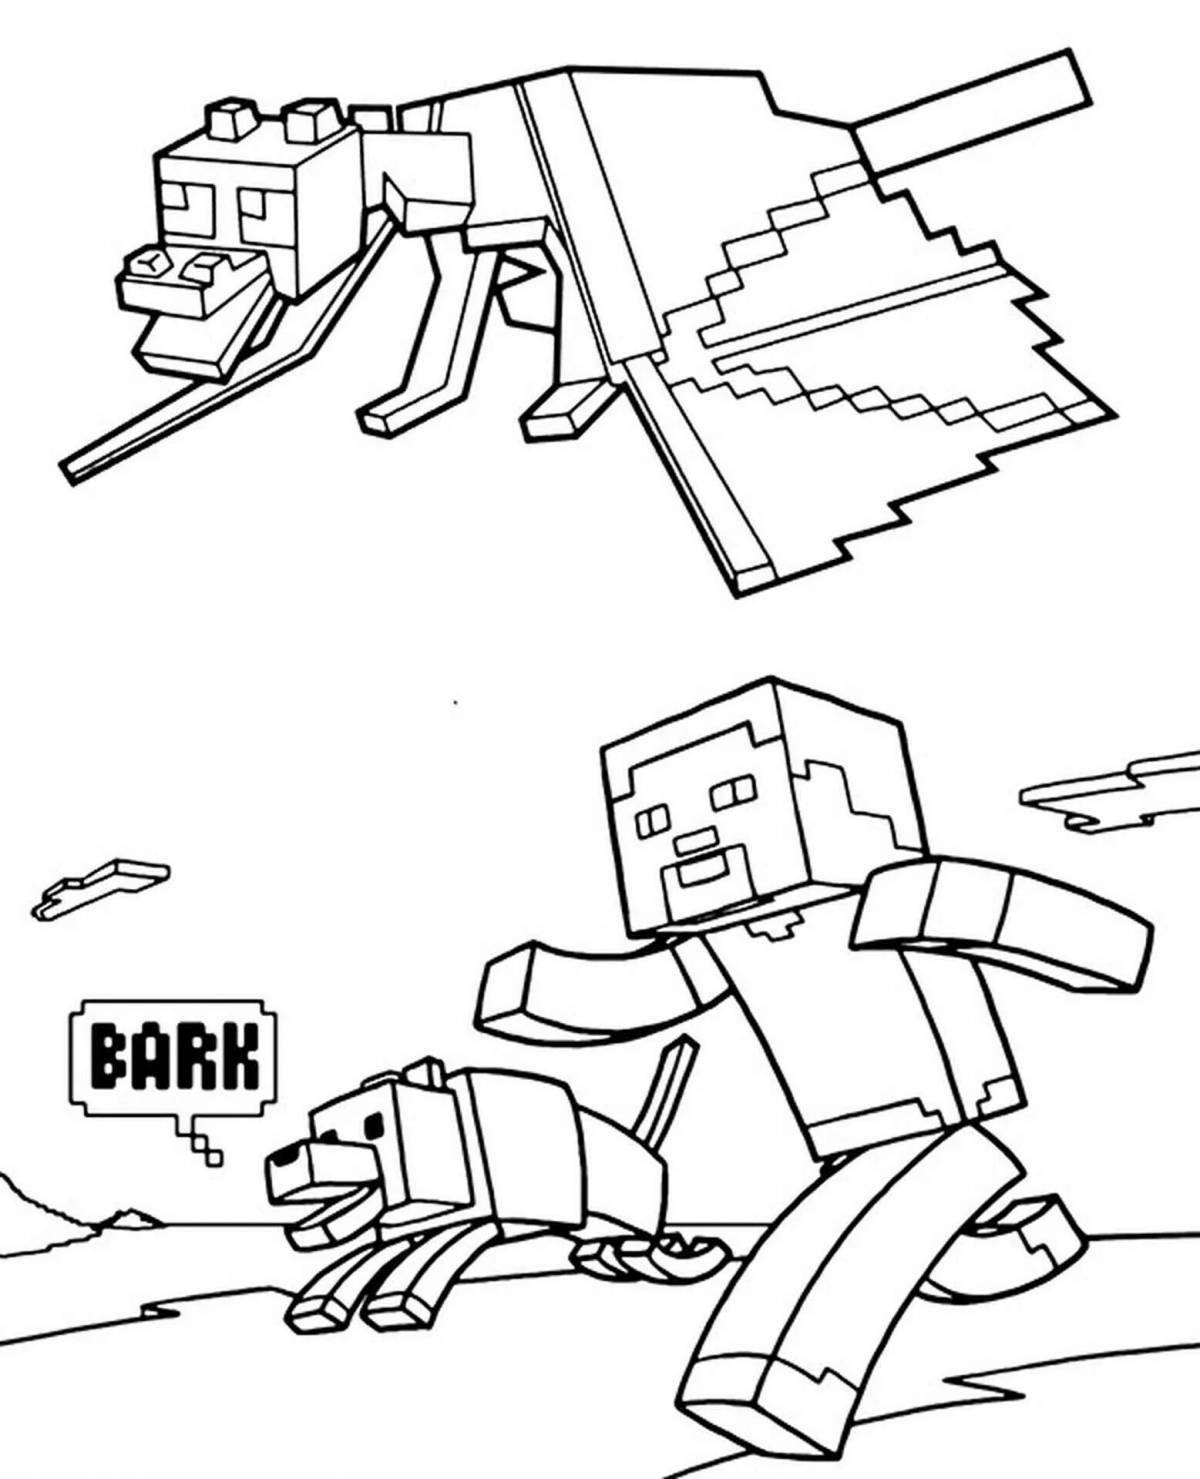 Playful minecraft hell coloring page